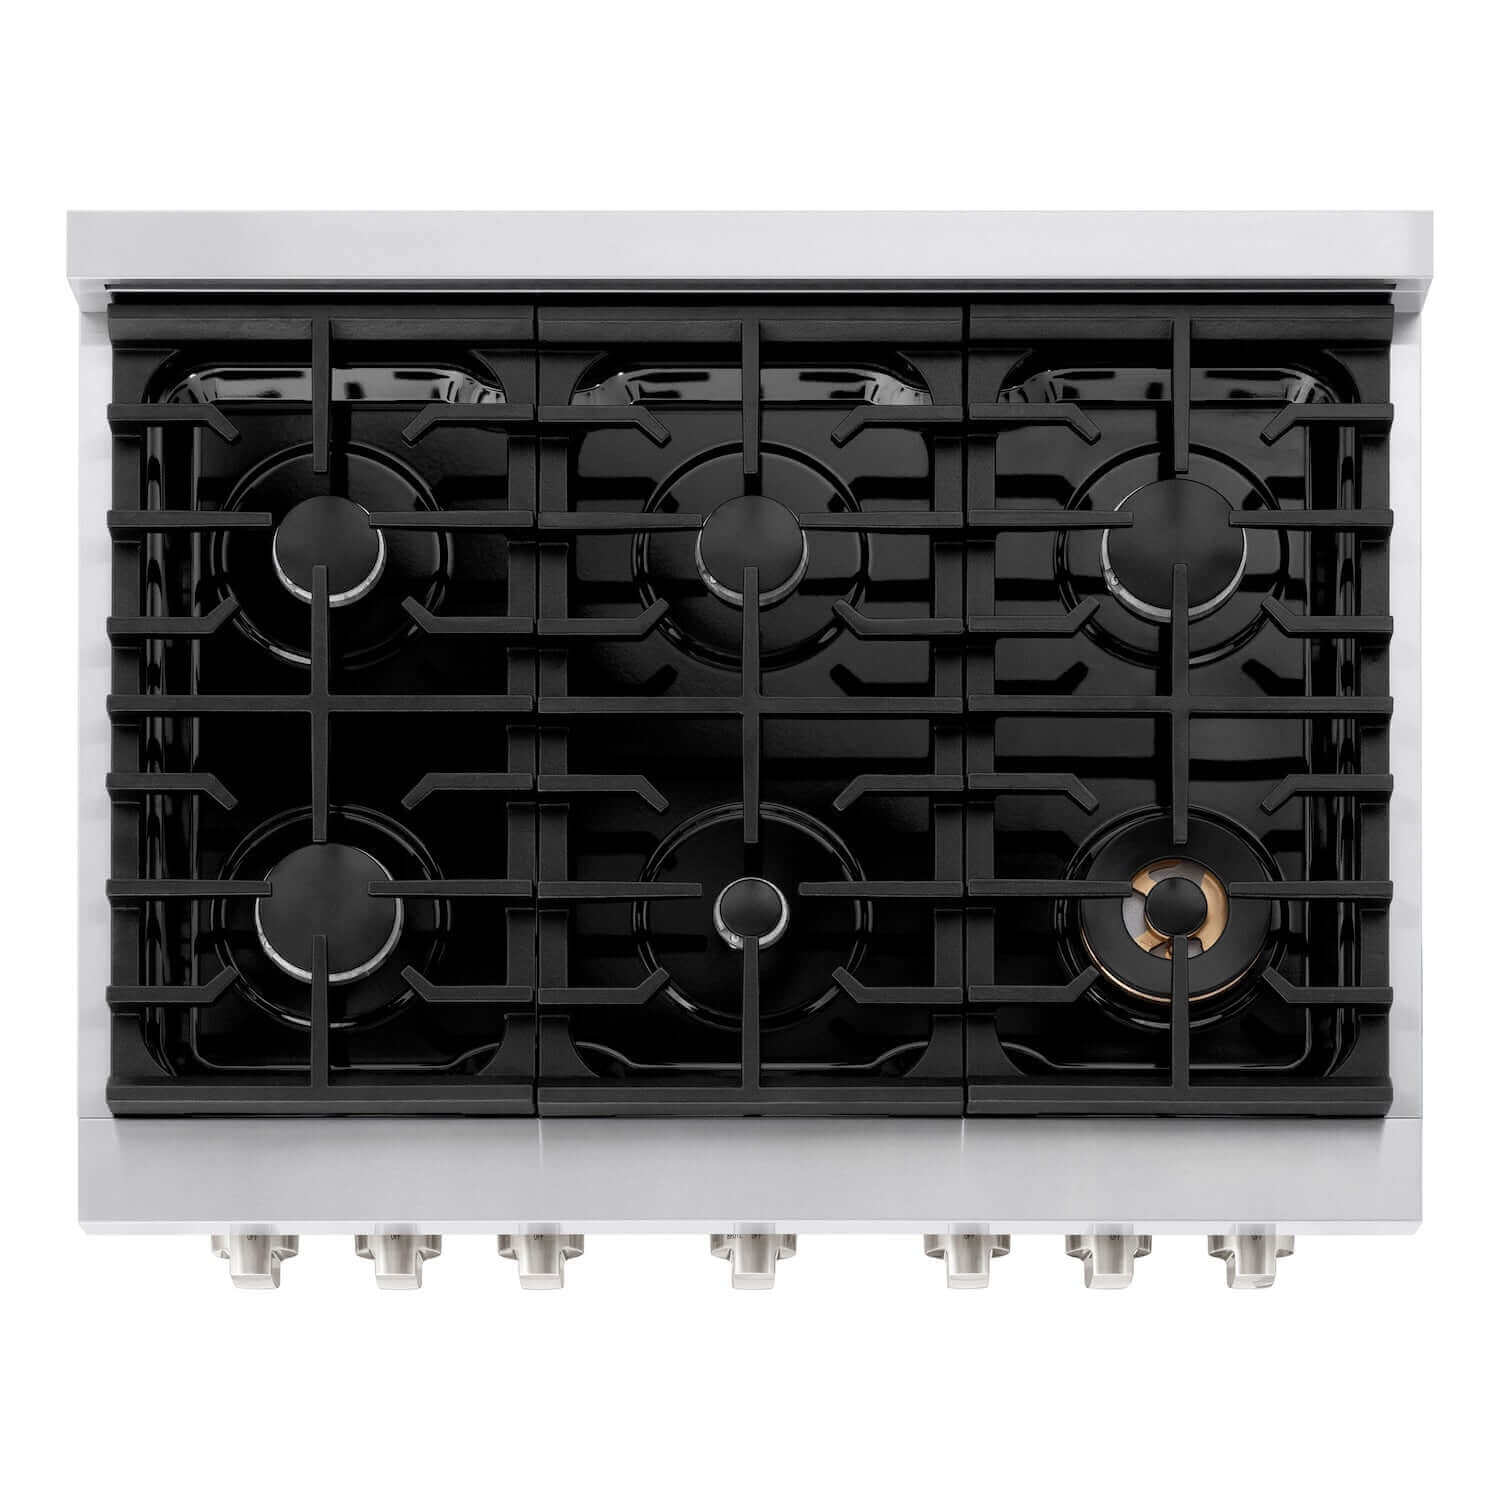 ZLINE 36-inch stainless steel gas range cooktop with black porcelain finish and 6 burners.